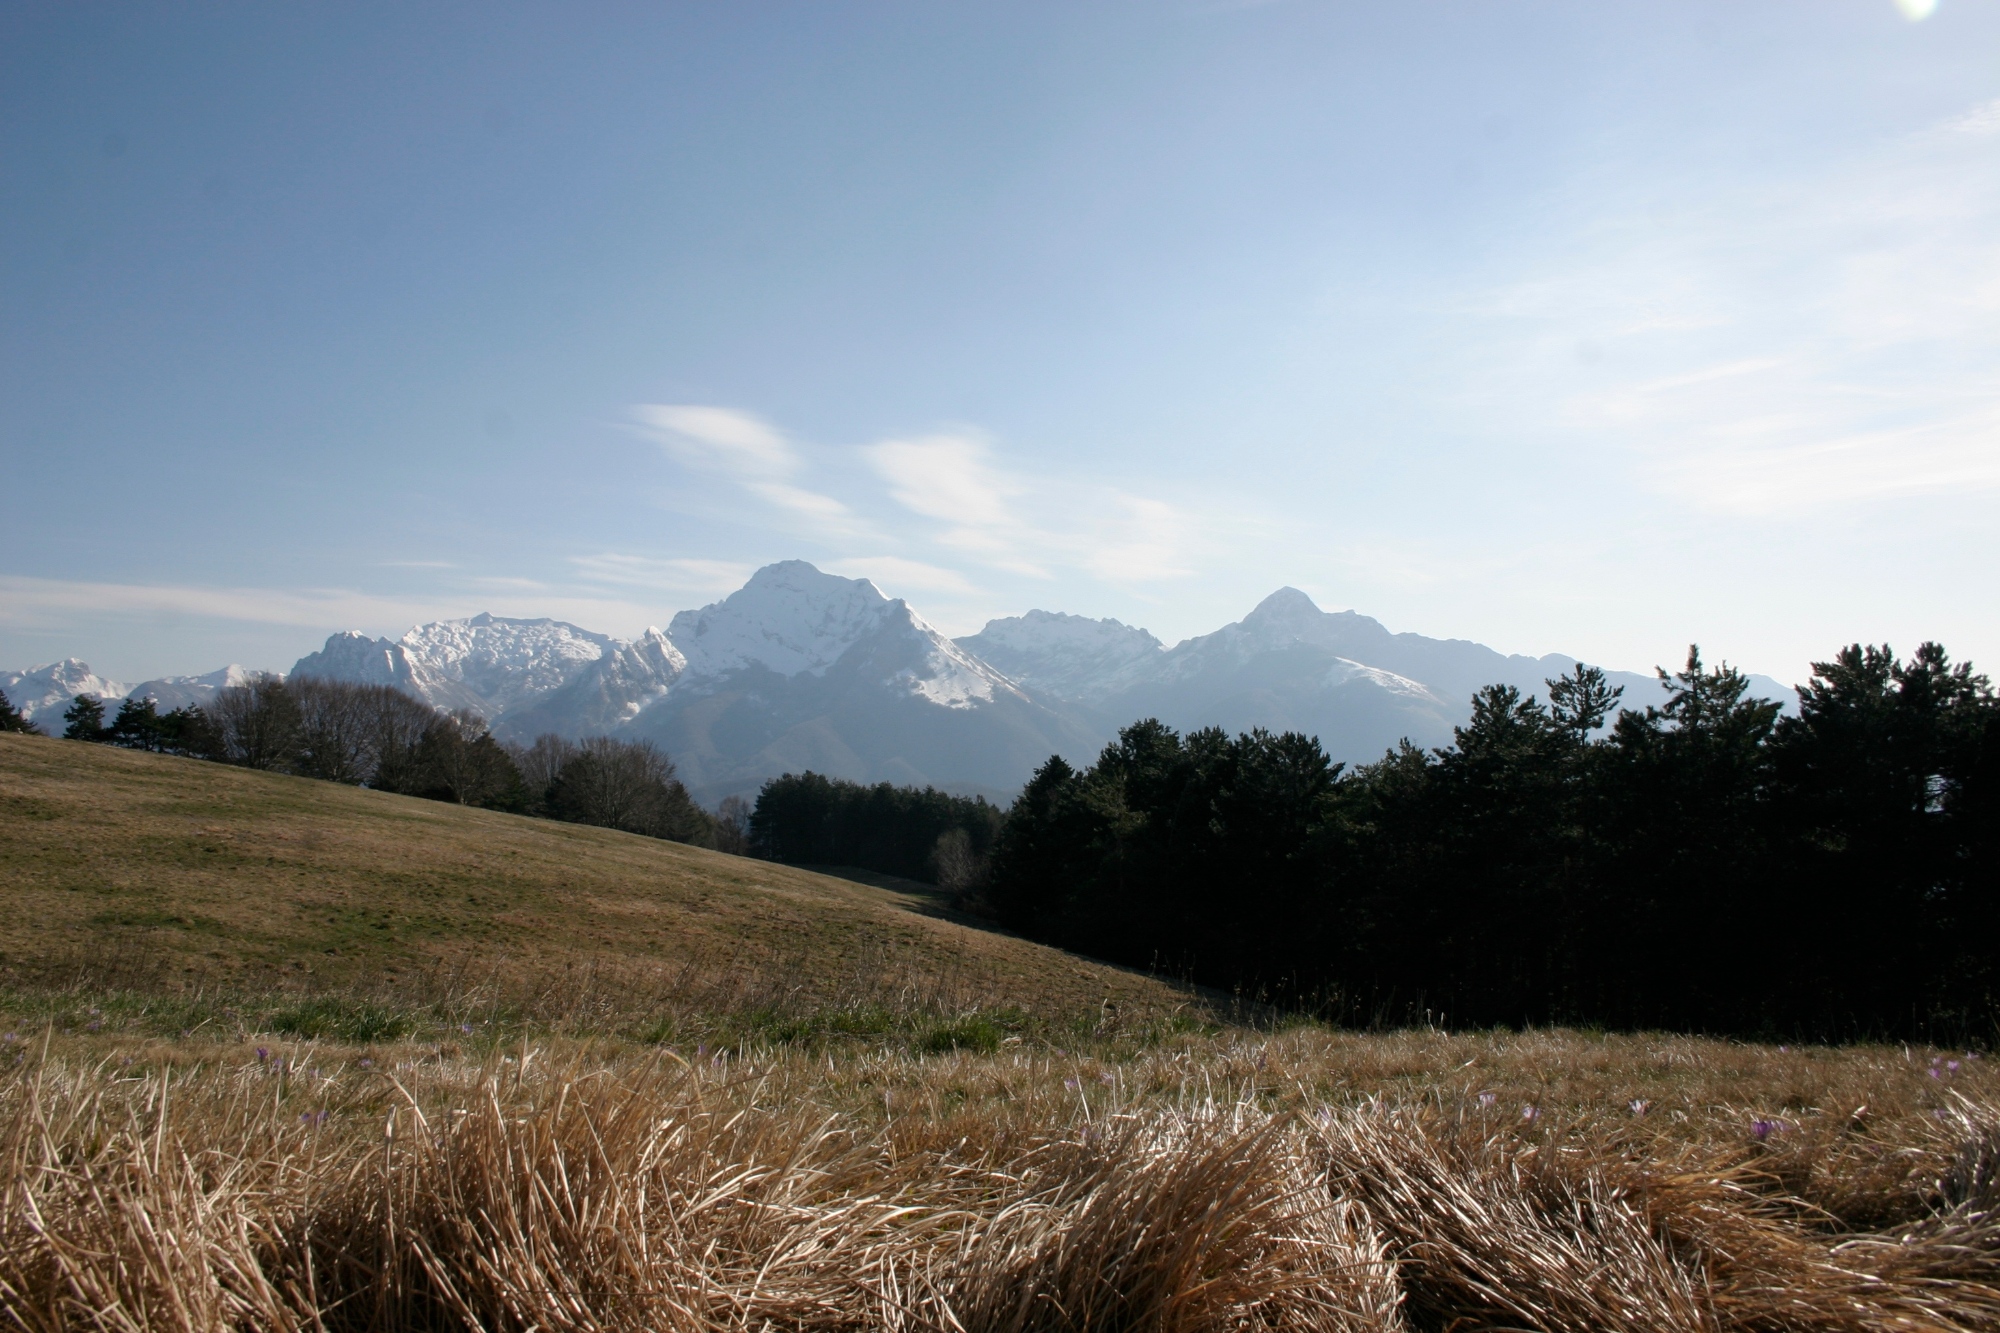 Apuan Alps from Minucciano